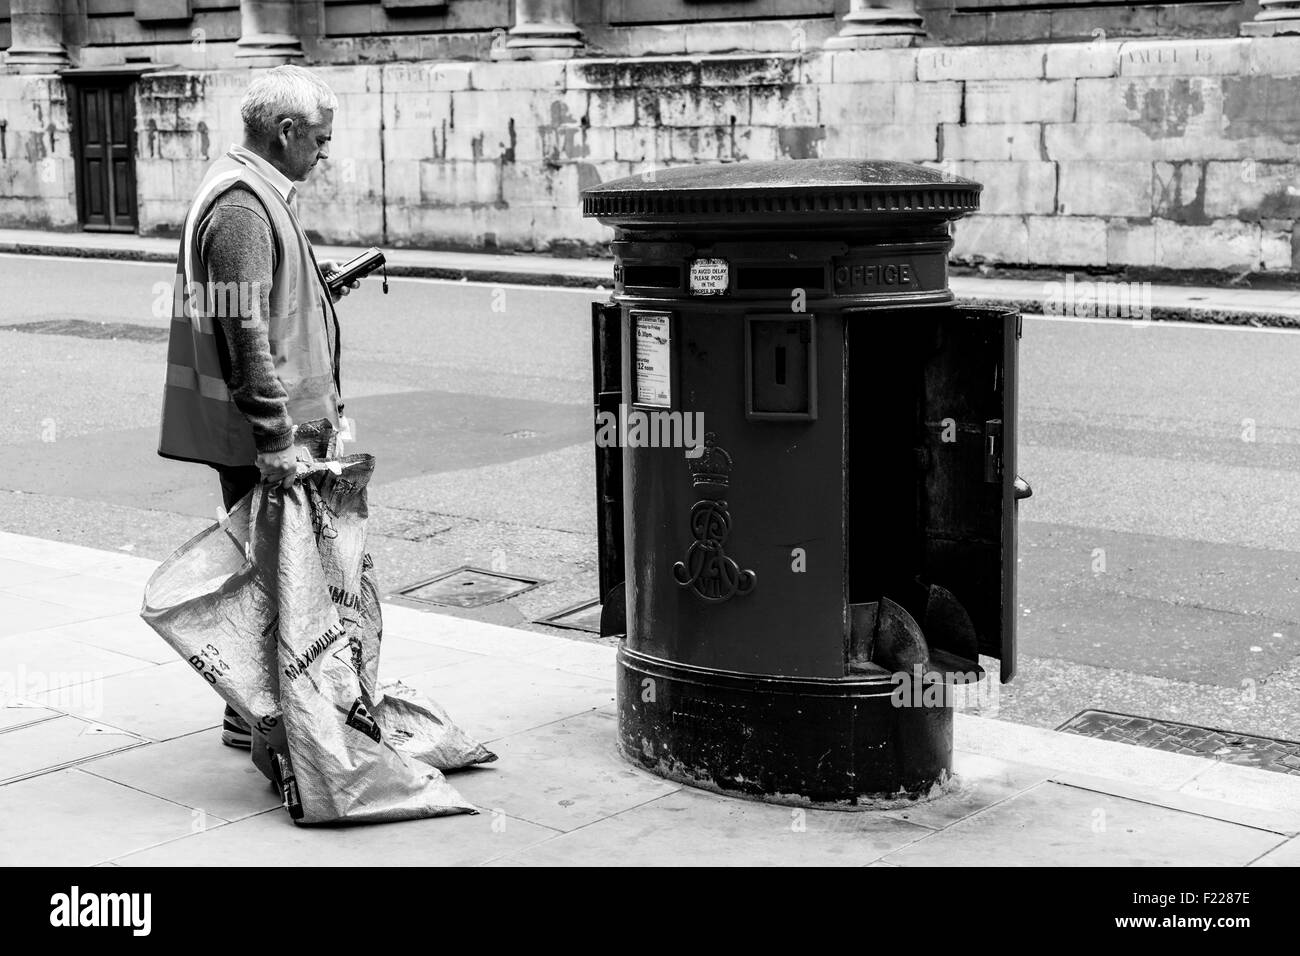 A Royal Mail Worker Collects The Mail From A Post Box In Central London, England Stock Photo